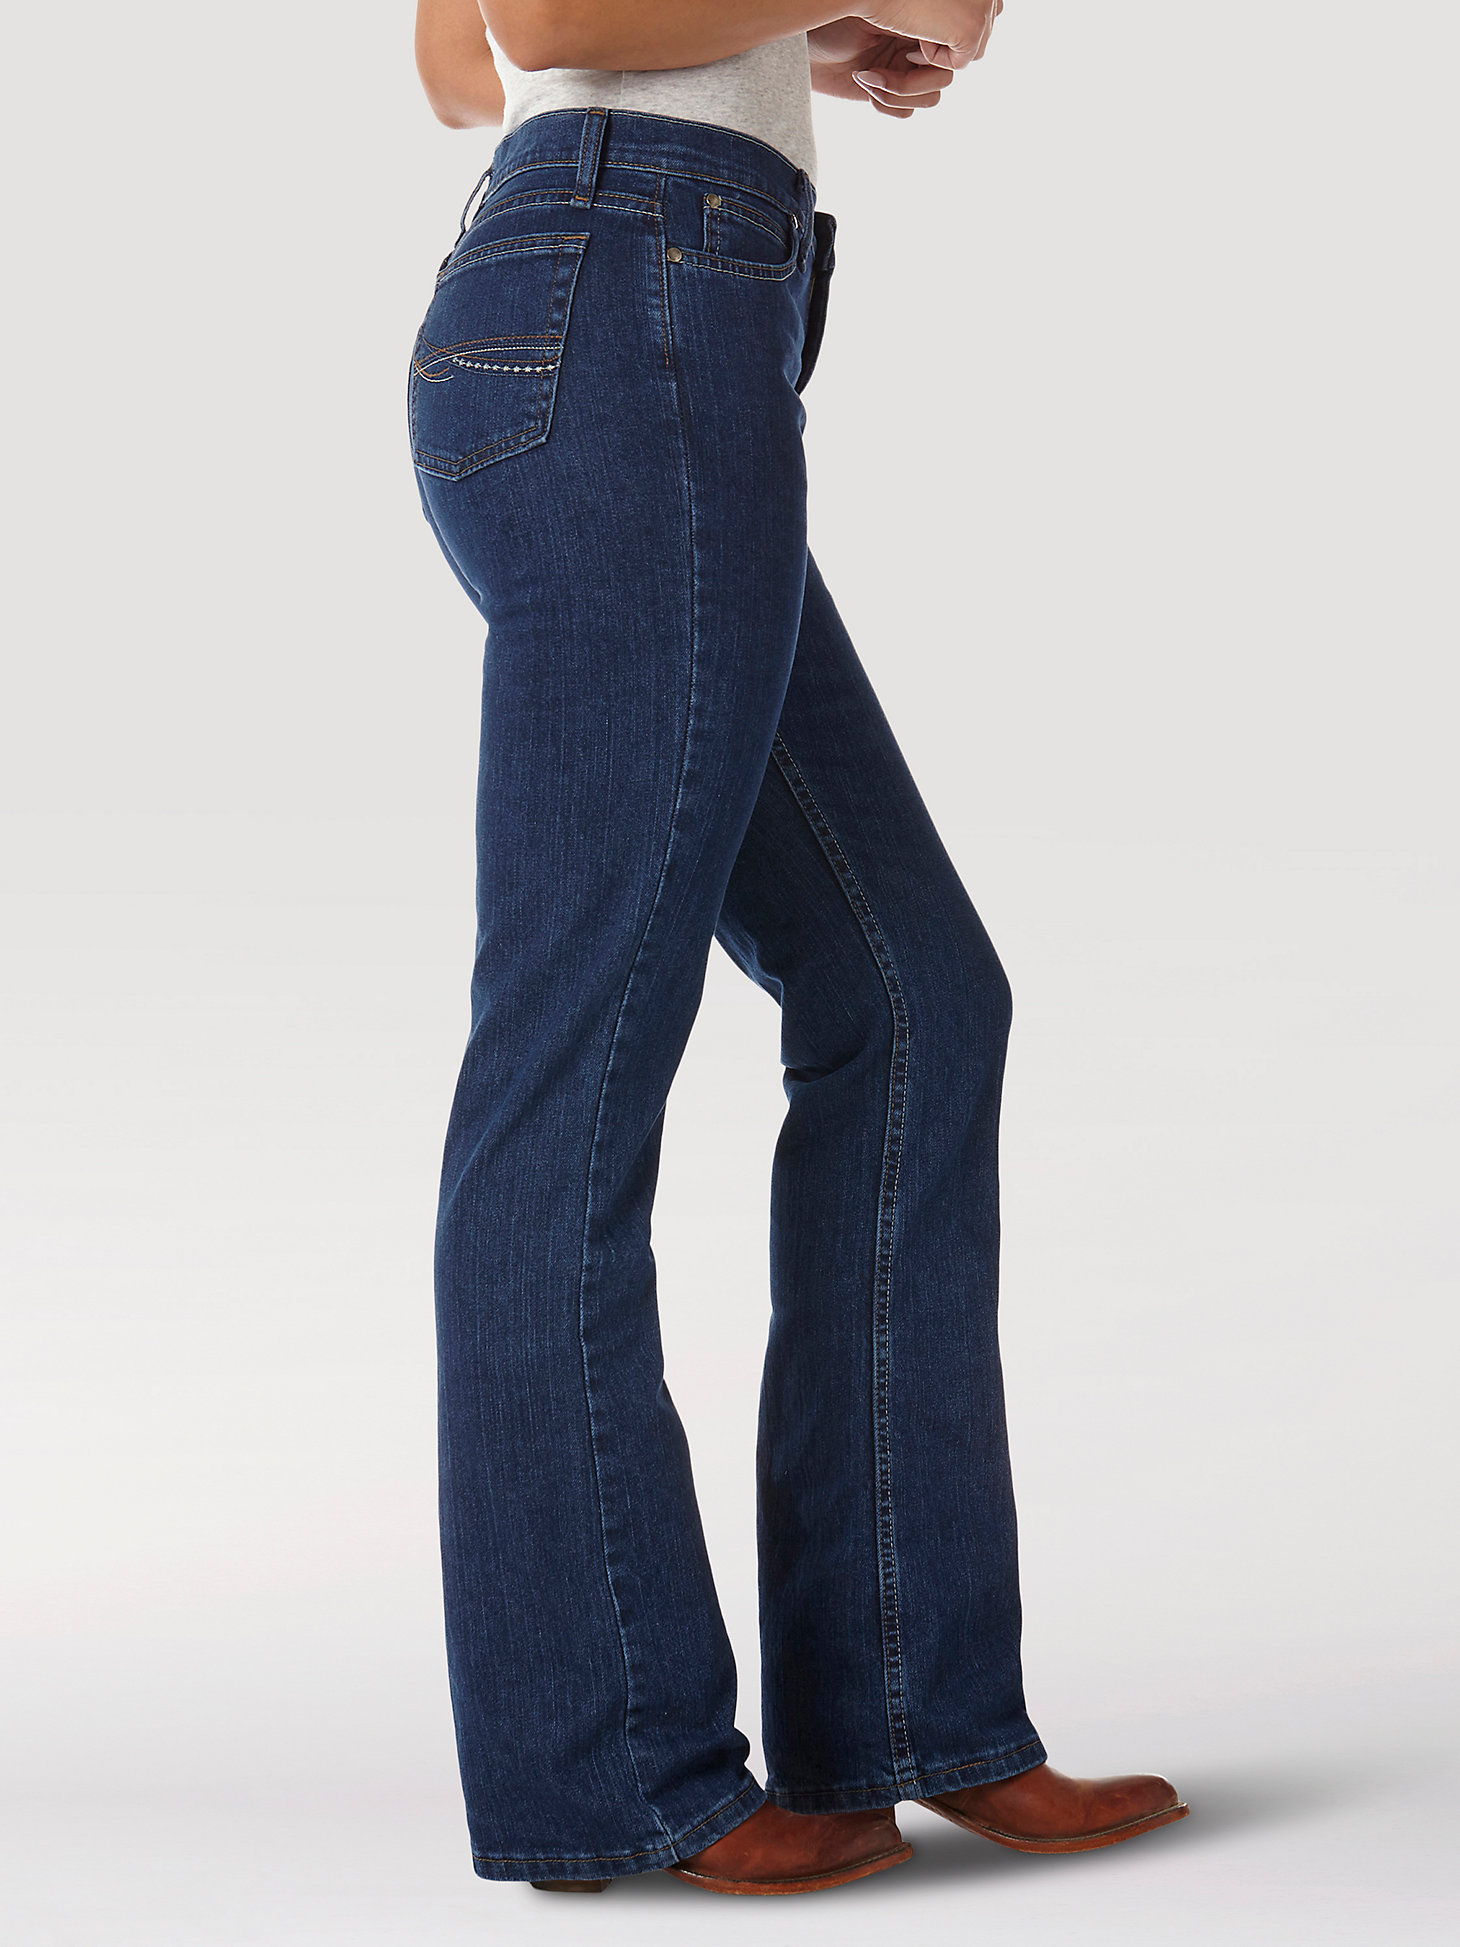 As Real As Wrangler Misses Classic Fit Bootcut Jean in CW Denim alternative view 1